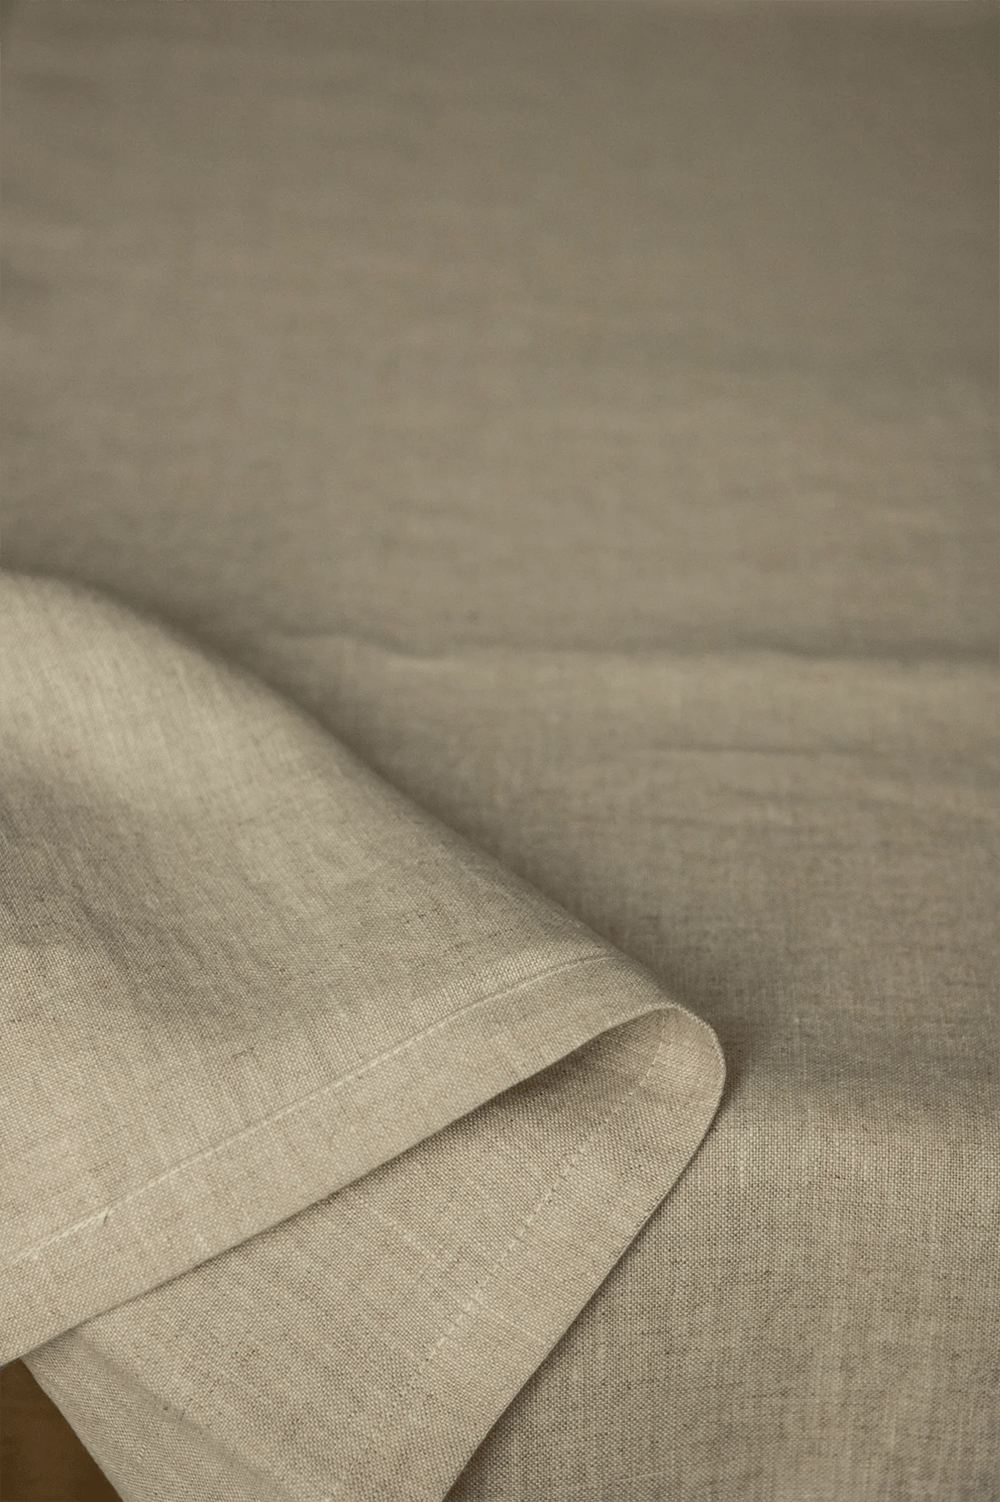 Close-up of the details in the Linen Tablecloth by Timeless Linen.